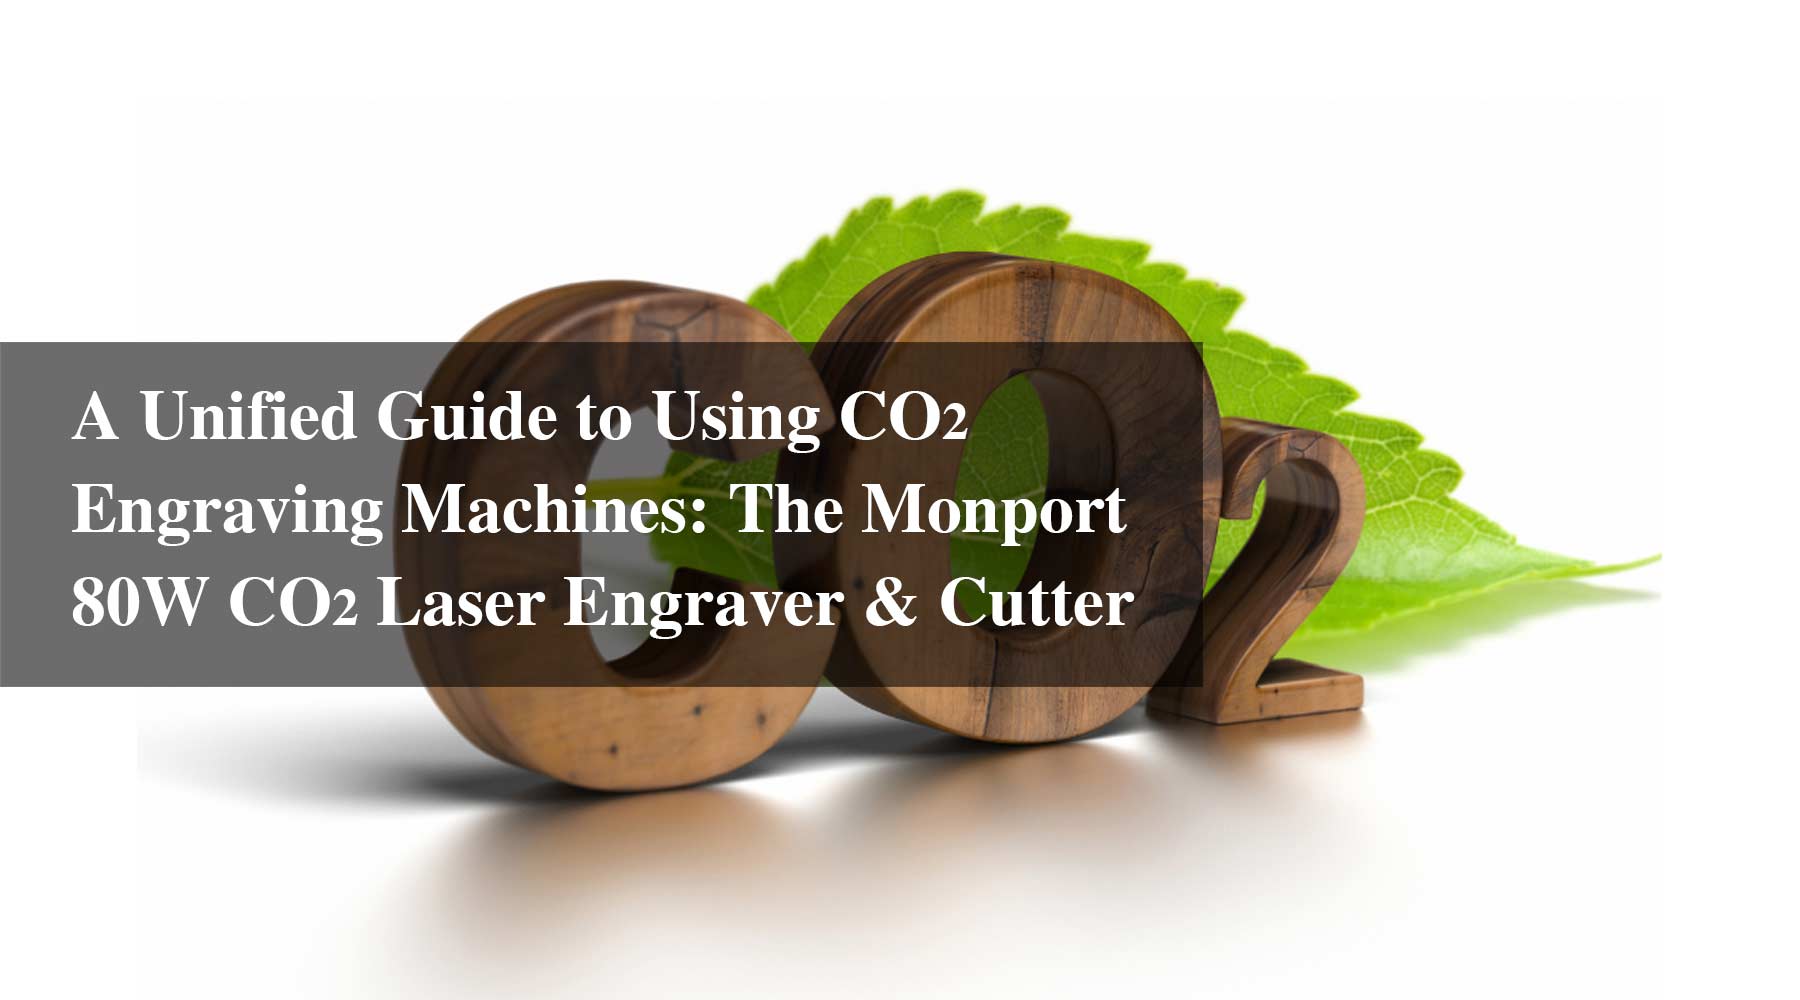 A Unified Guide to Using CO2 Engraving Machines: The Monport 80W CO2 Laser Engraver & Cutter